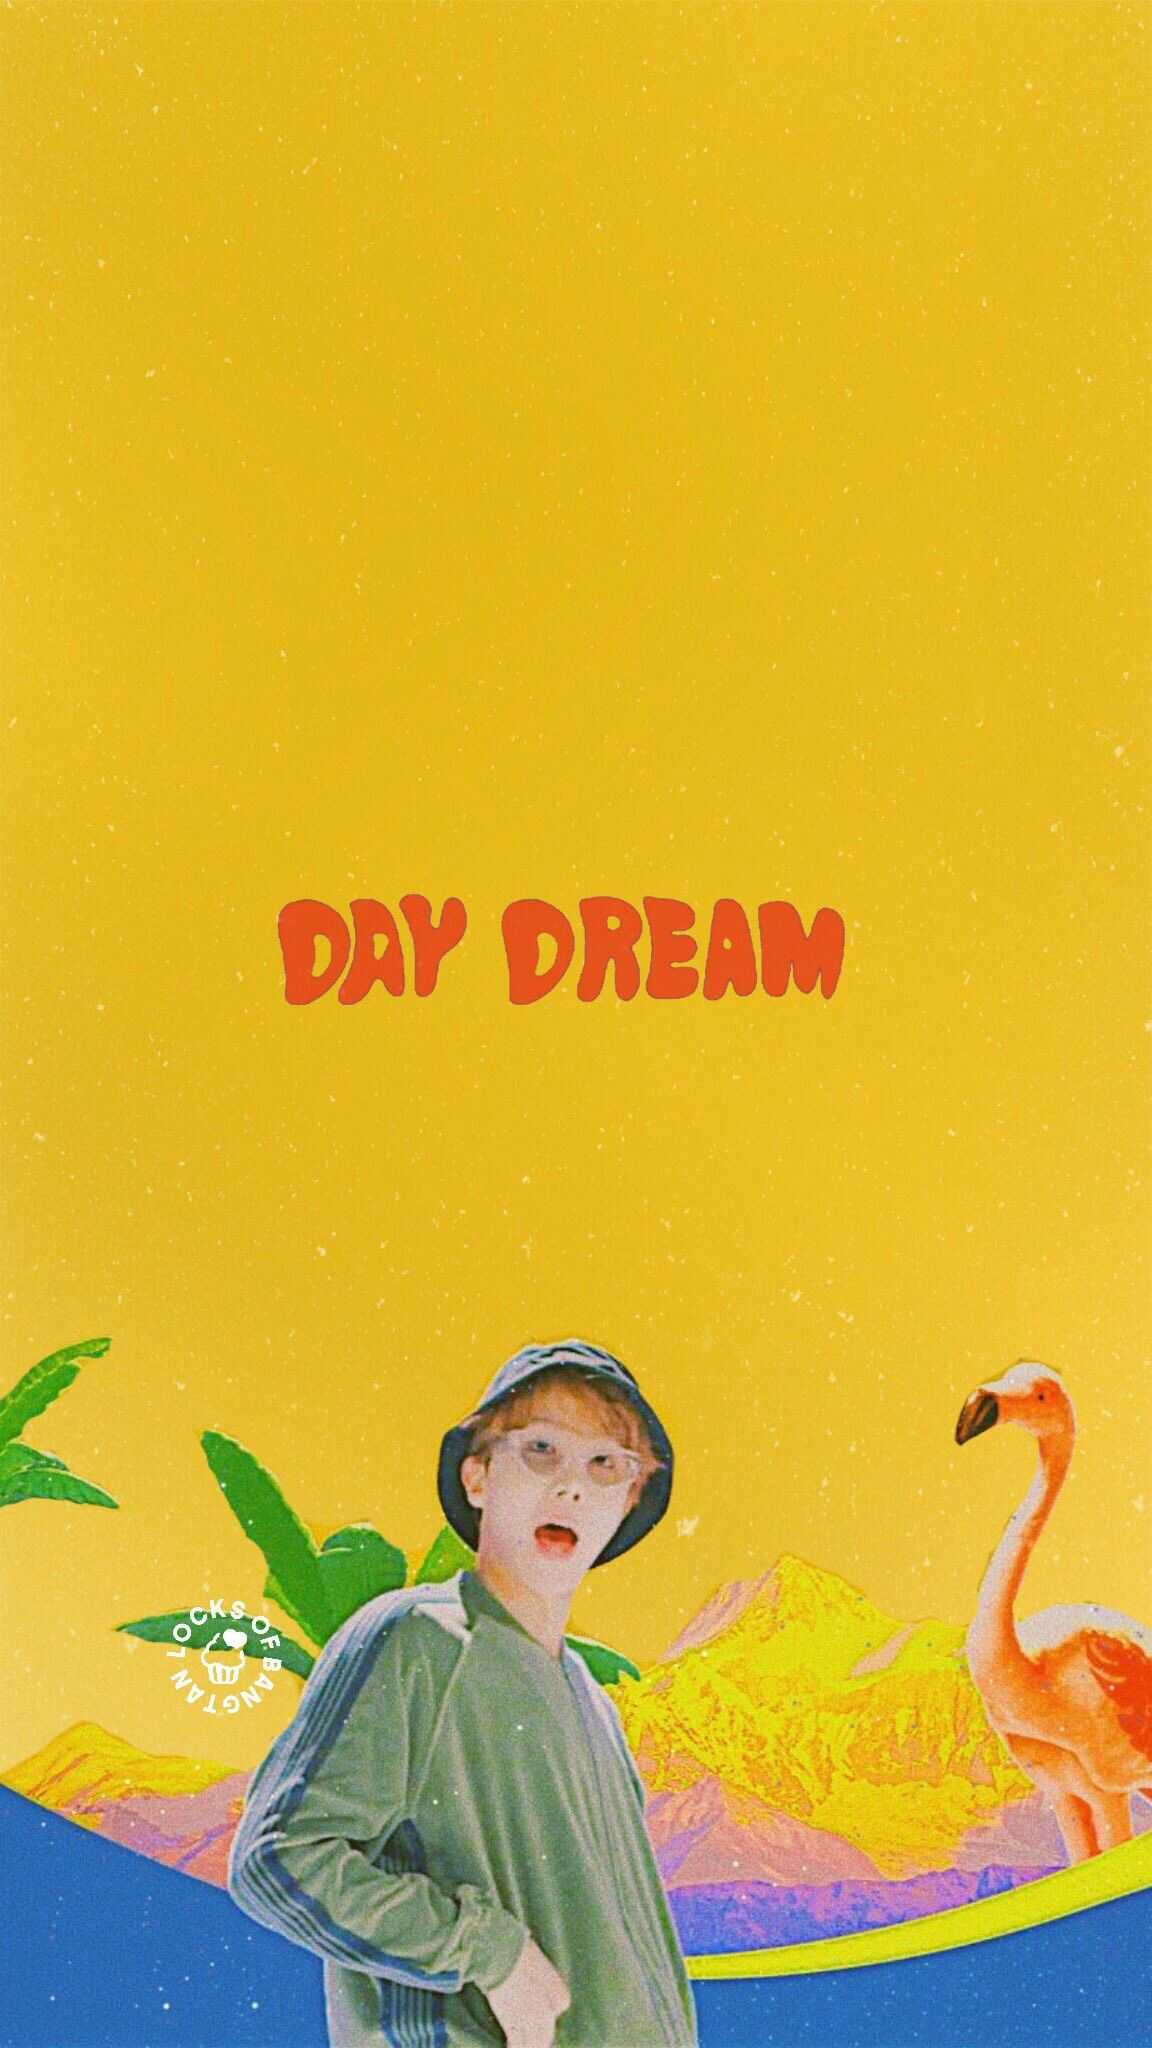 Jhope Wallpapers 1